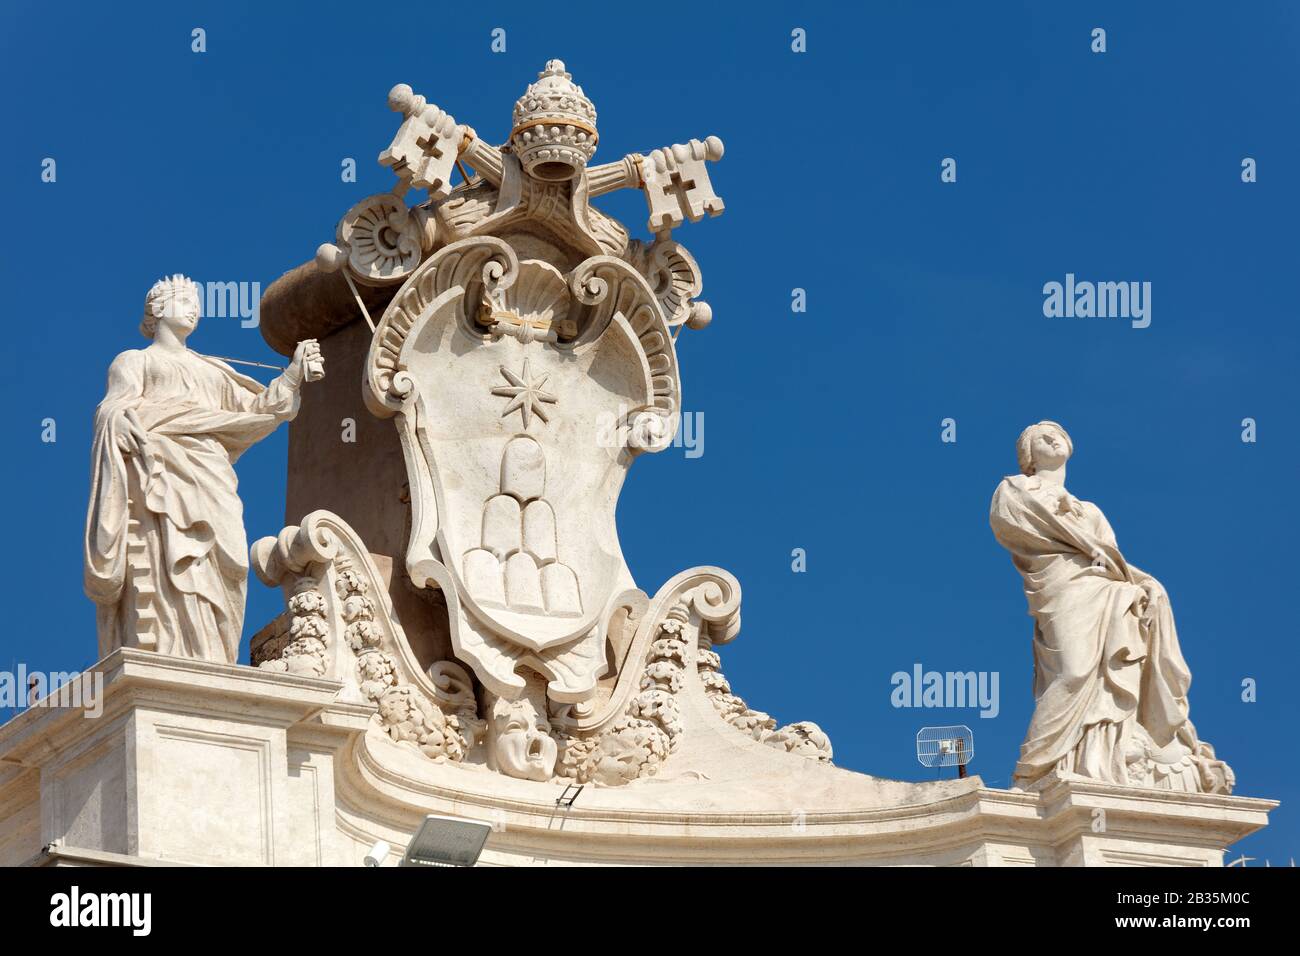 Statues on the colonnade of St. Peter's square in Vatican Stock Photo